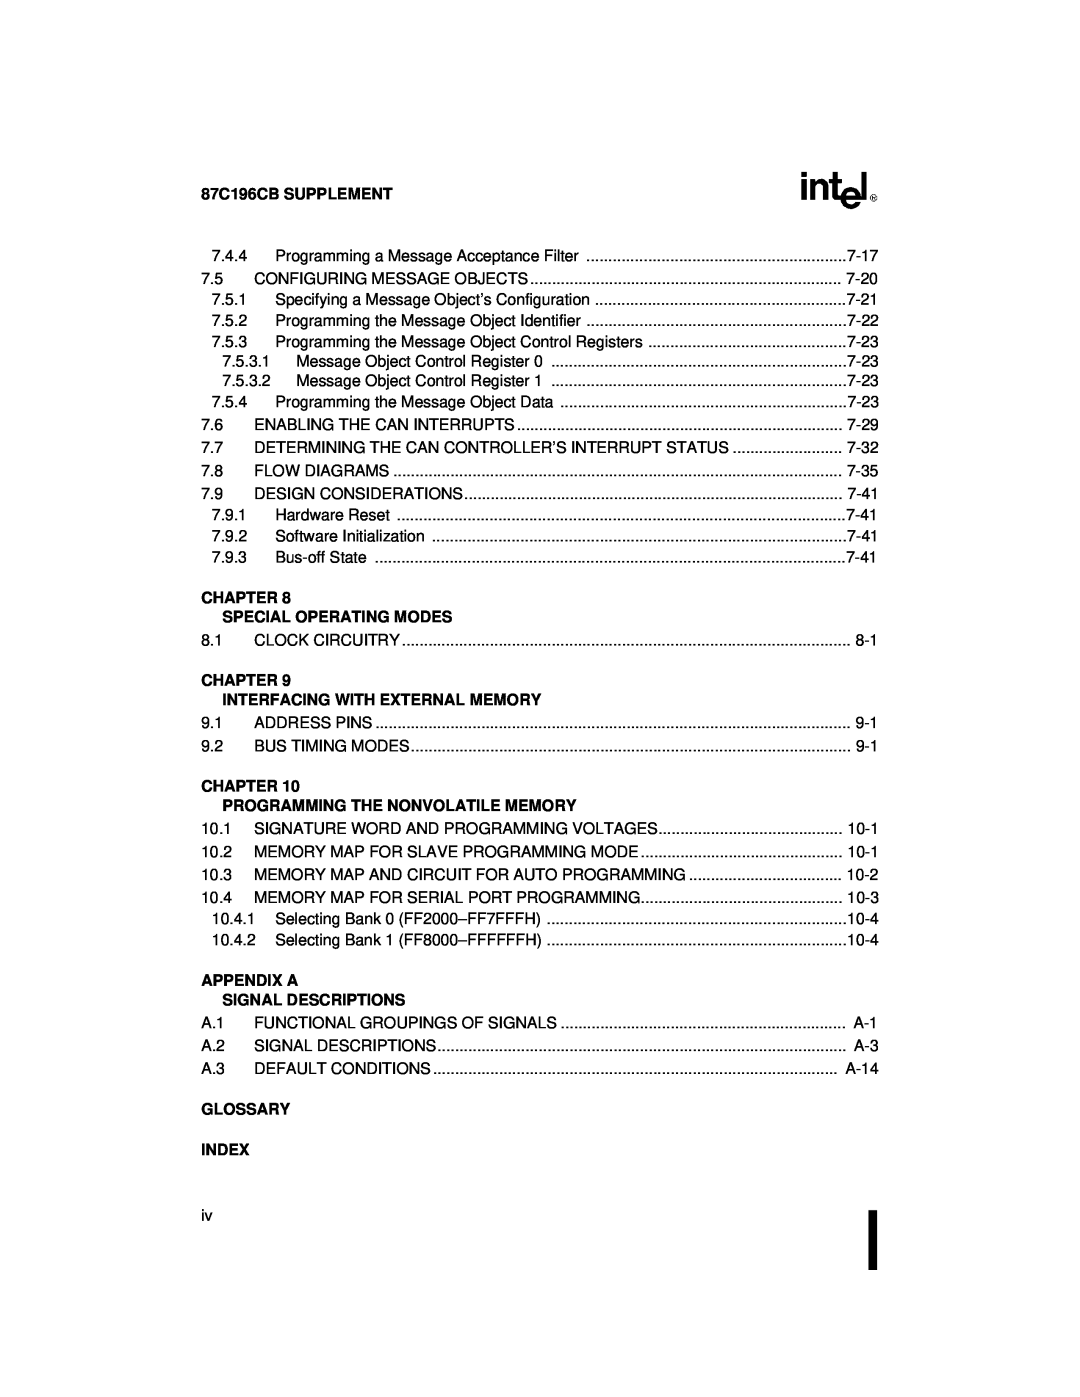 Intel 8XC196NT 87C196CB SUPPLEMENT, Chapter, Special Operating Modes, Interfacing With External Memory, Appendix A 